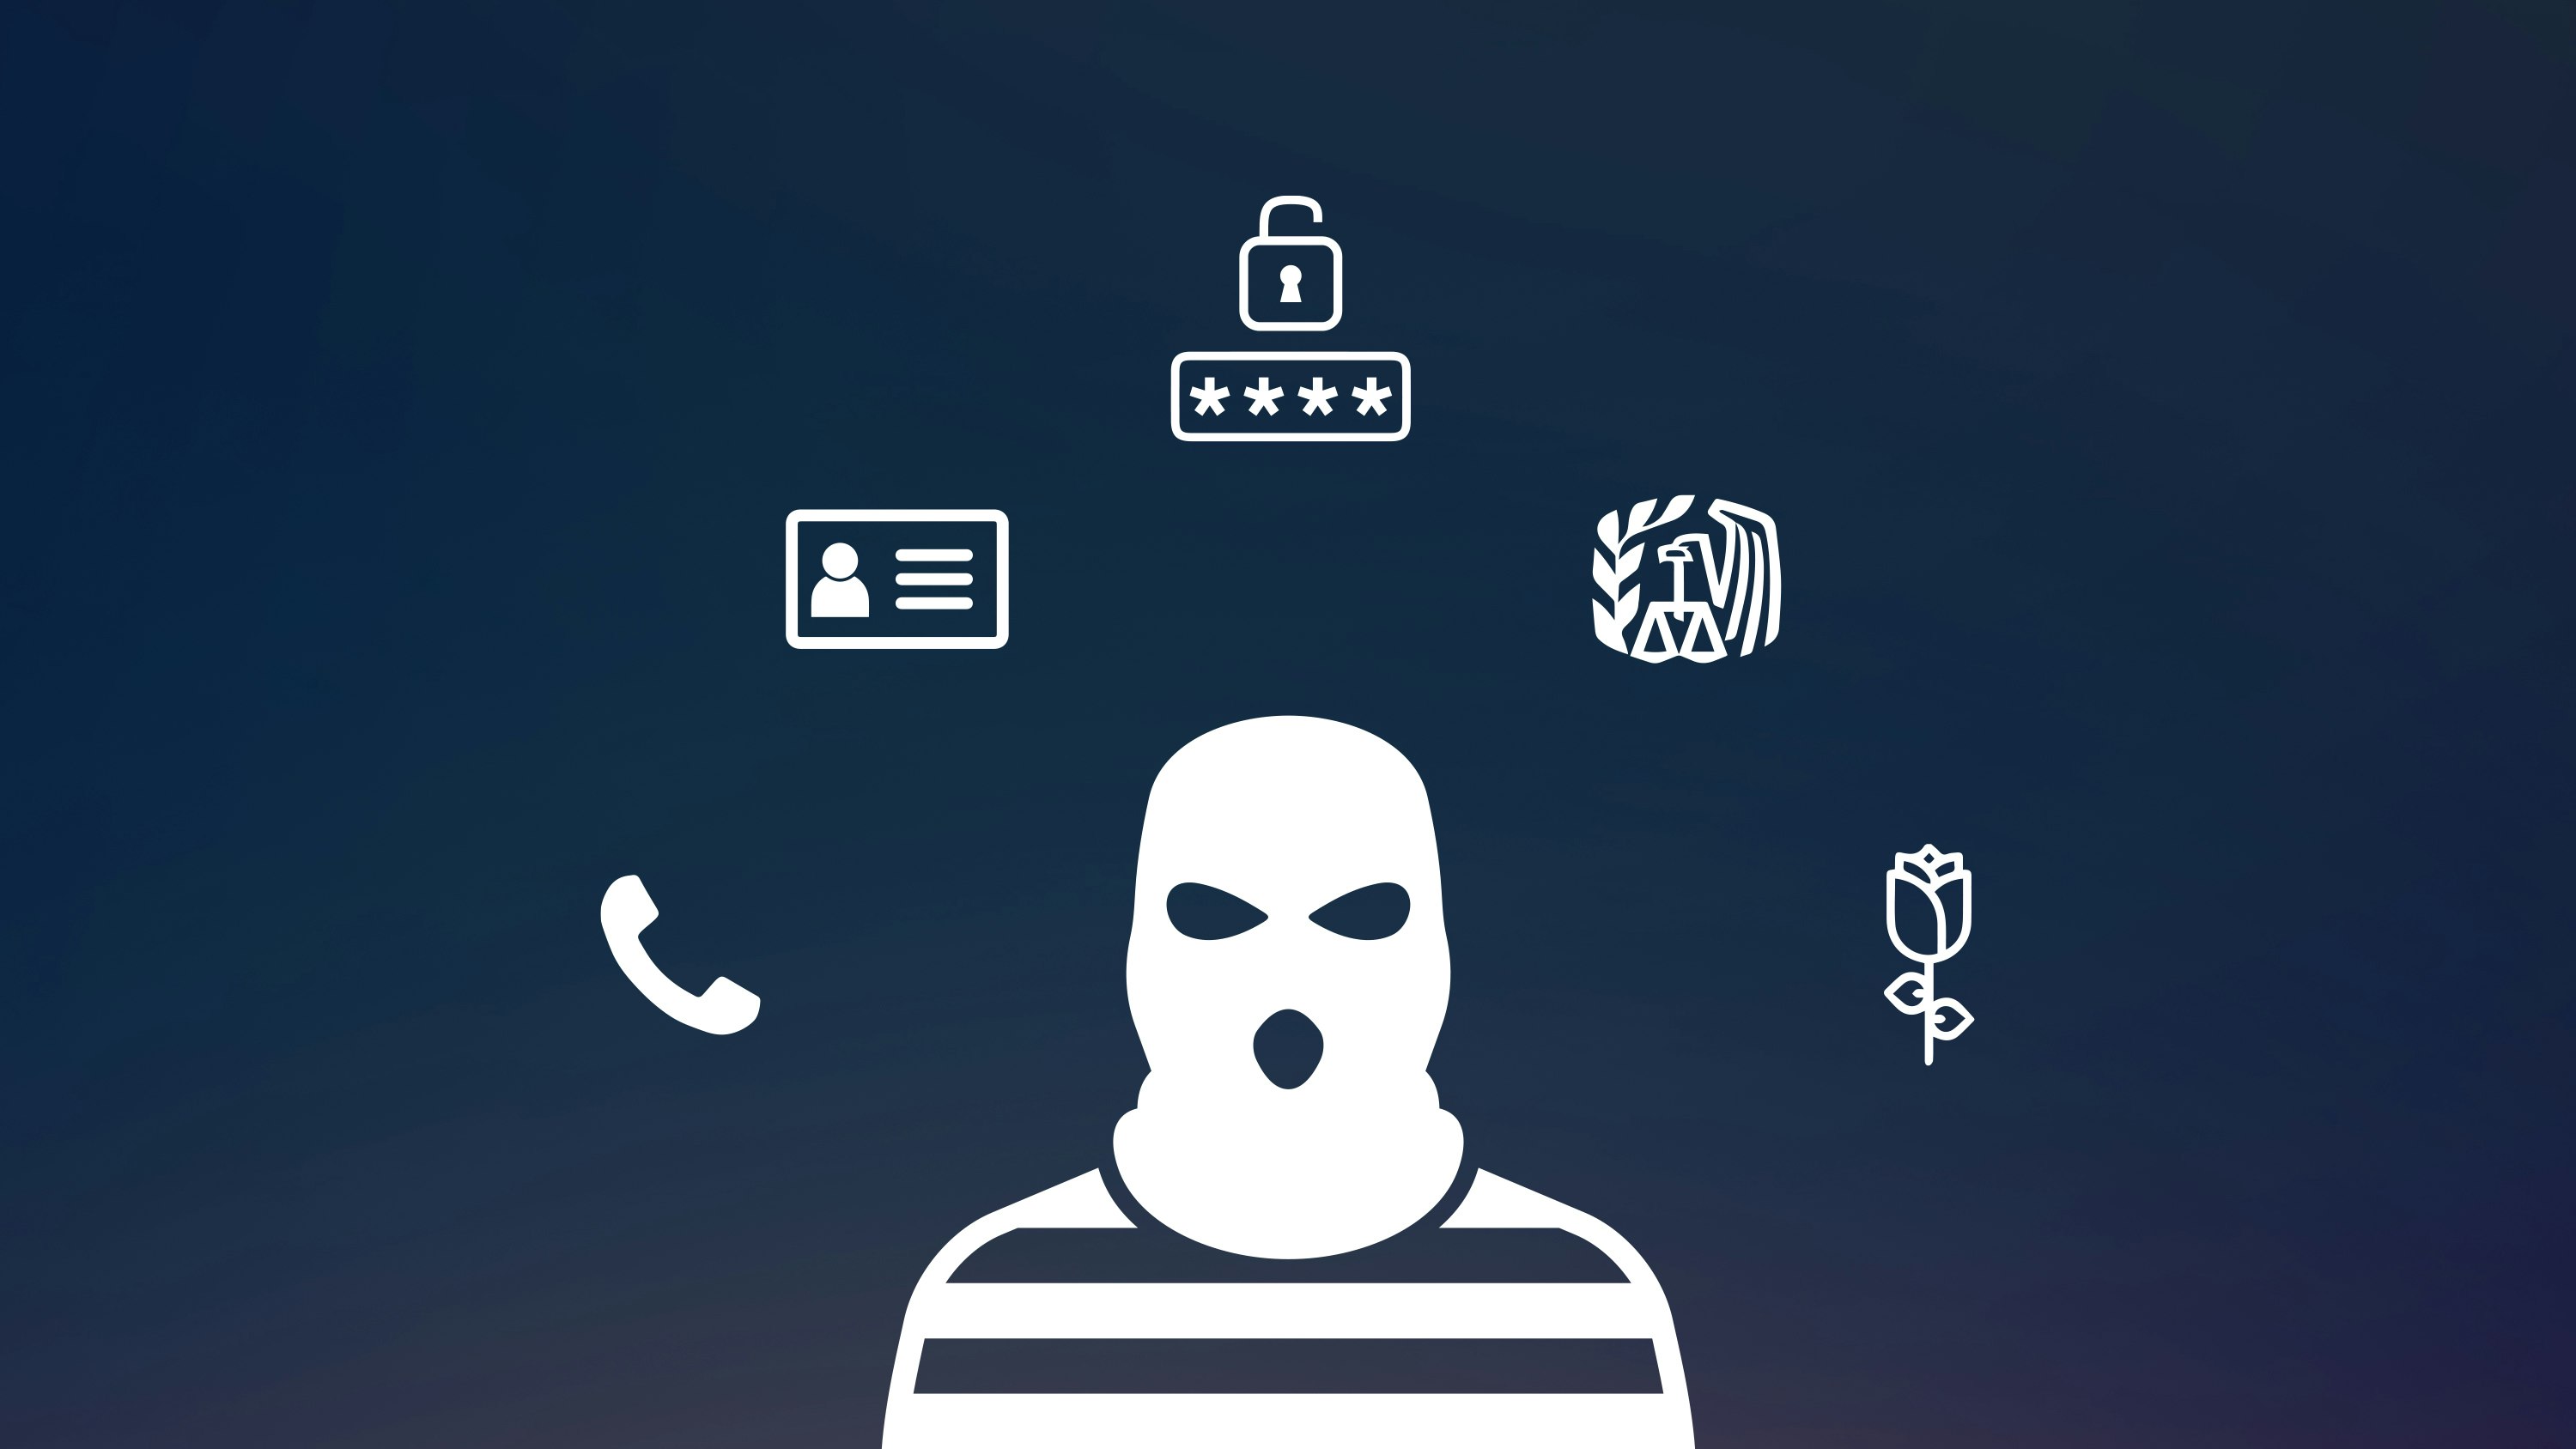 graphic of burglar surrounded by phone icon, lock and password icon, red rose icon, federal agency icon, online profile icon against dark blue background